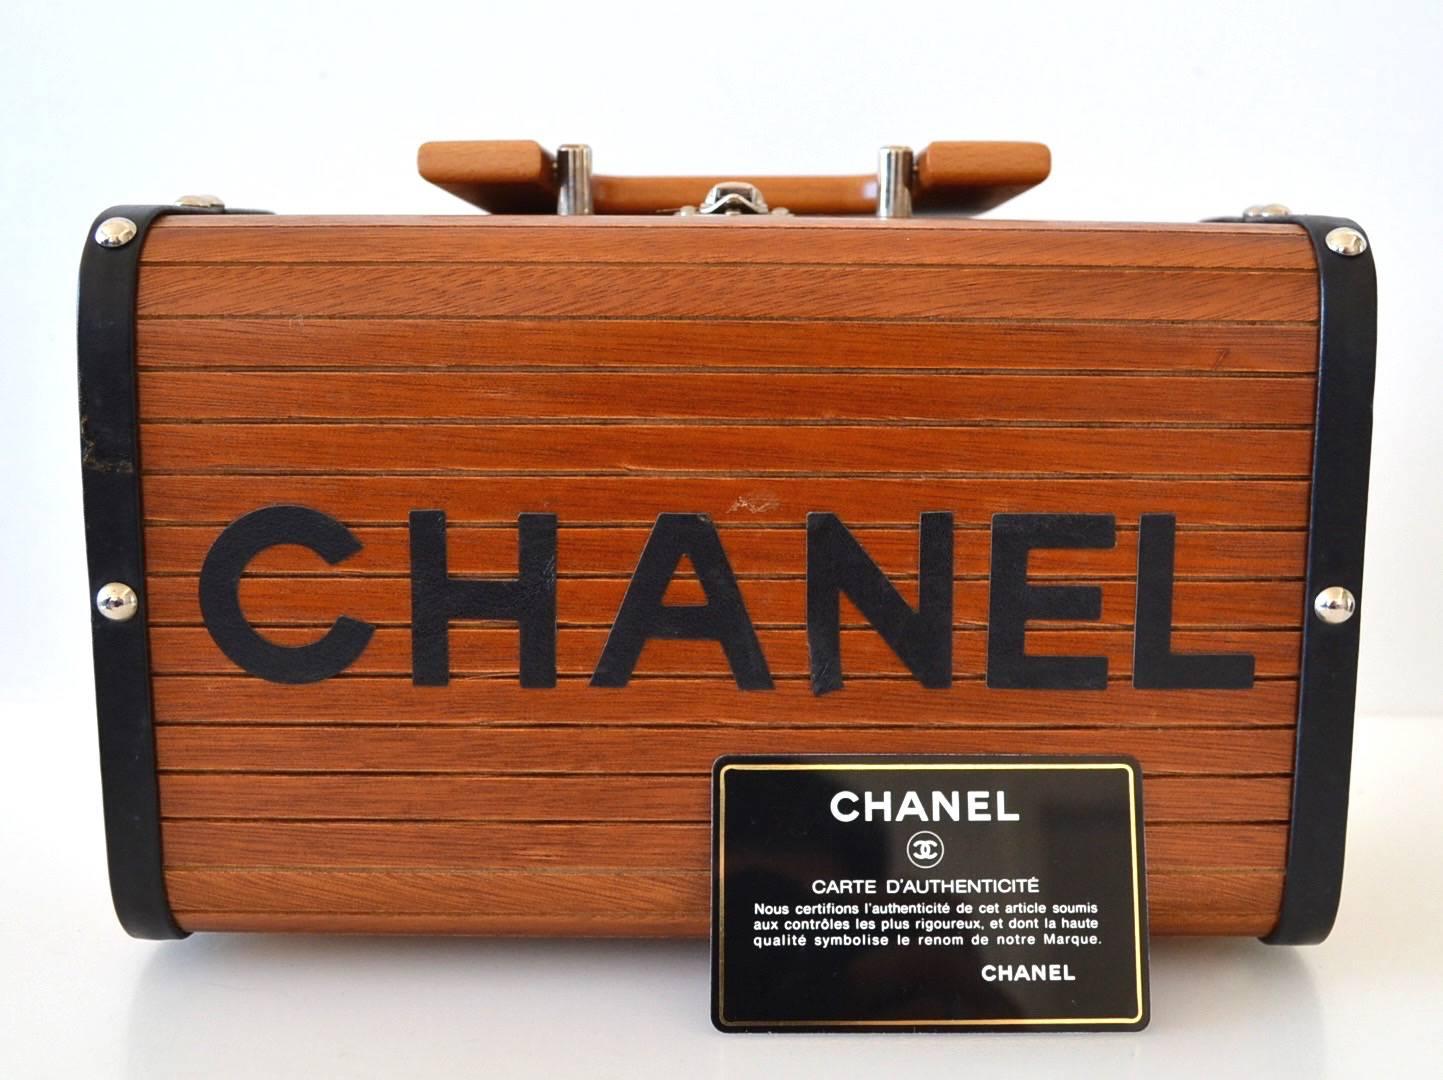 Chanel Limited Edition 1996
Collector piece
Natural wood Chanel mini trunk
Silver hardware with a flap wooden top handle.
Chanel letters in lamb skin
Burgundy lining with Chanel writting and hologram 3986334
Zippy pocket inside
 
Authenticity card